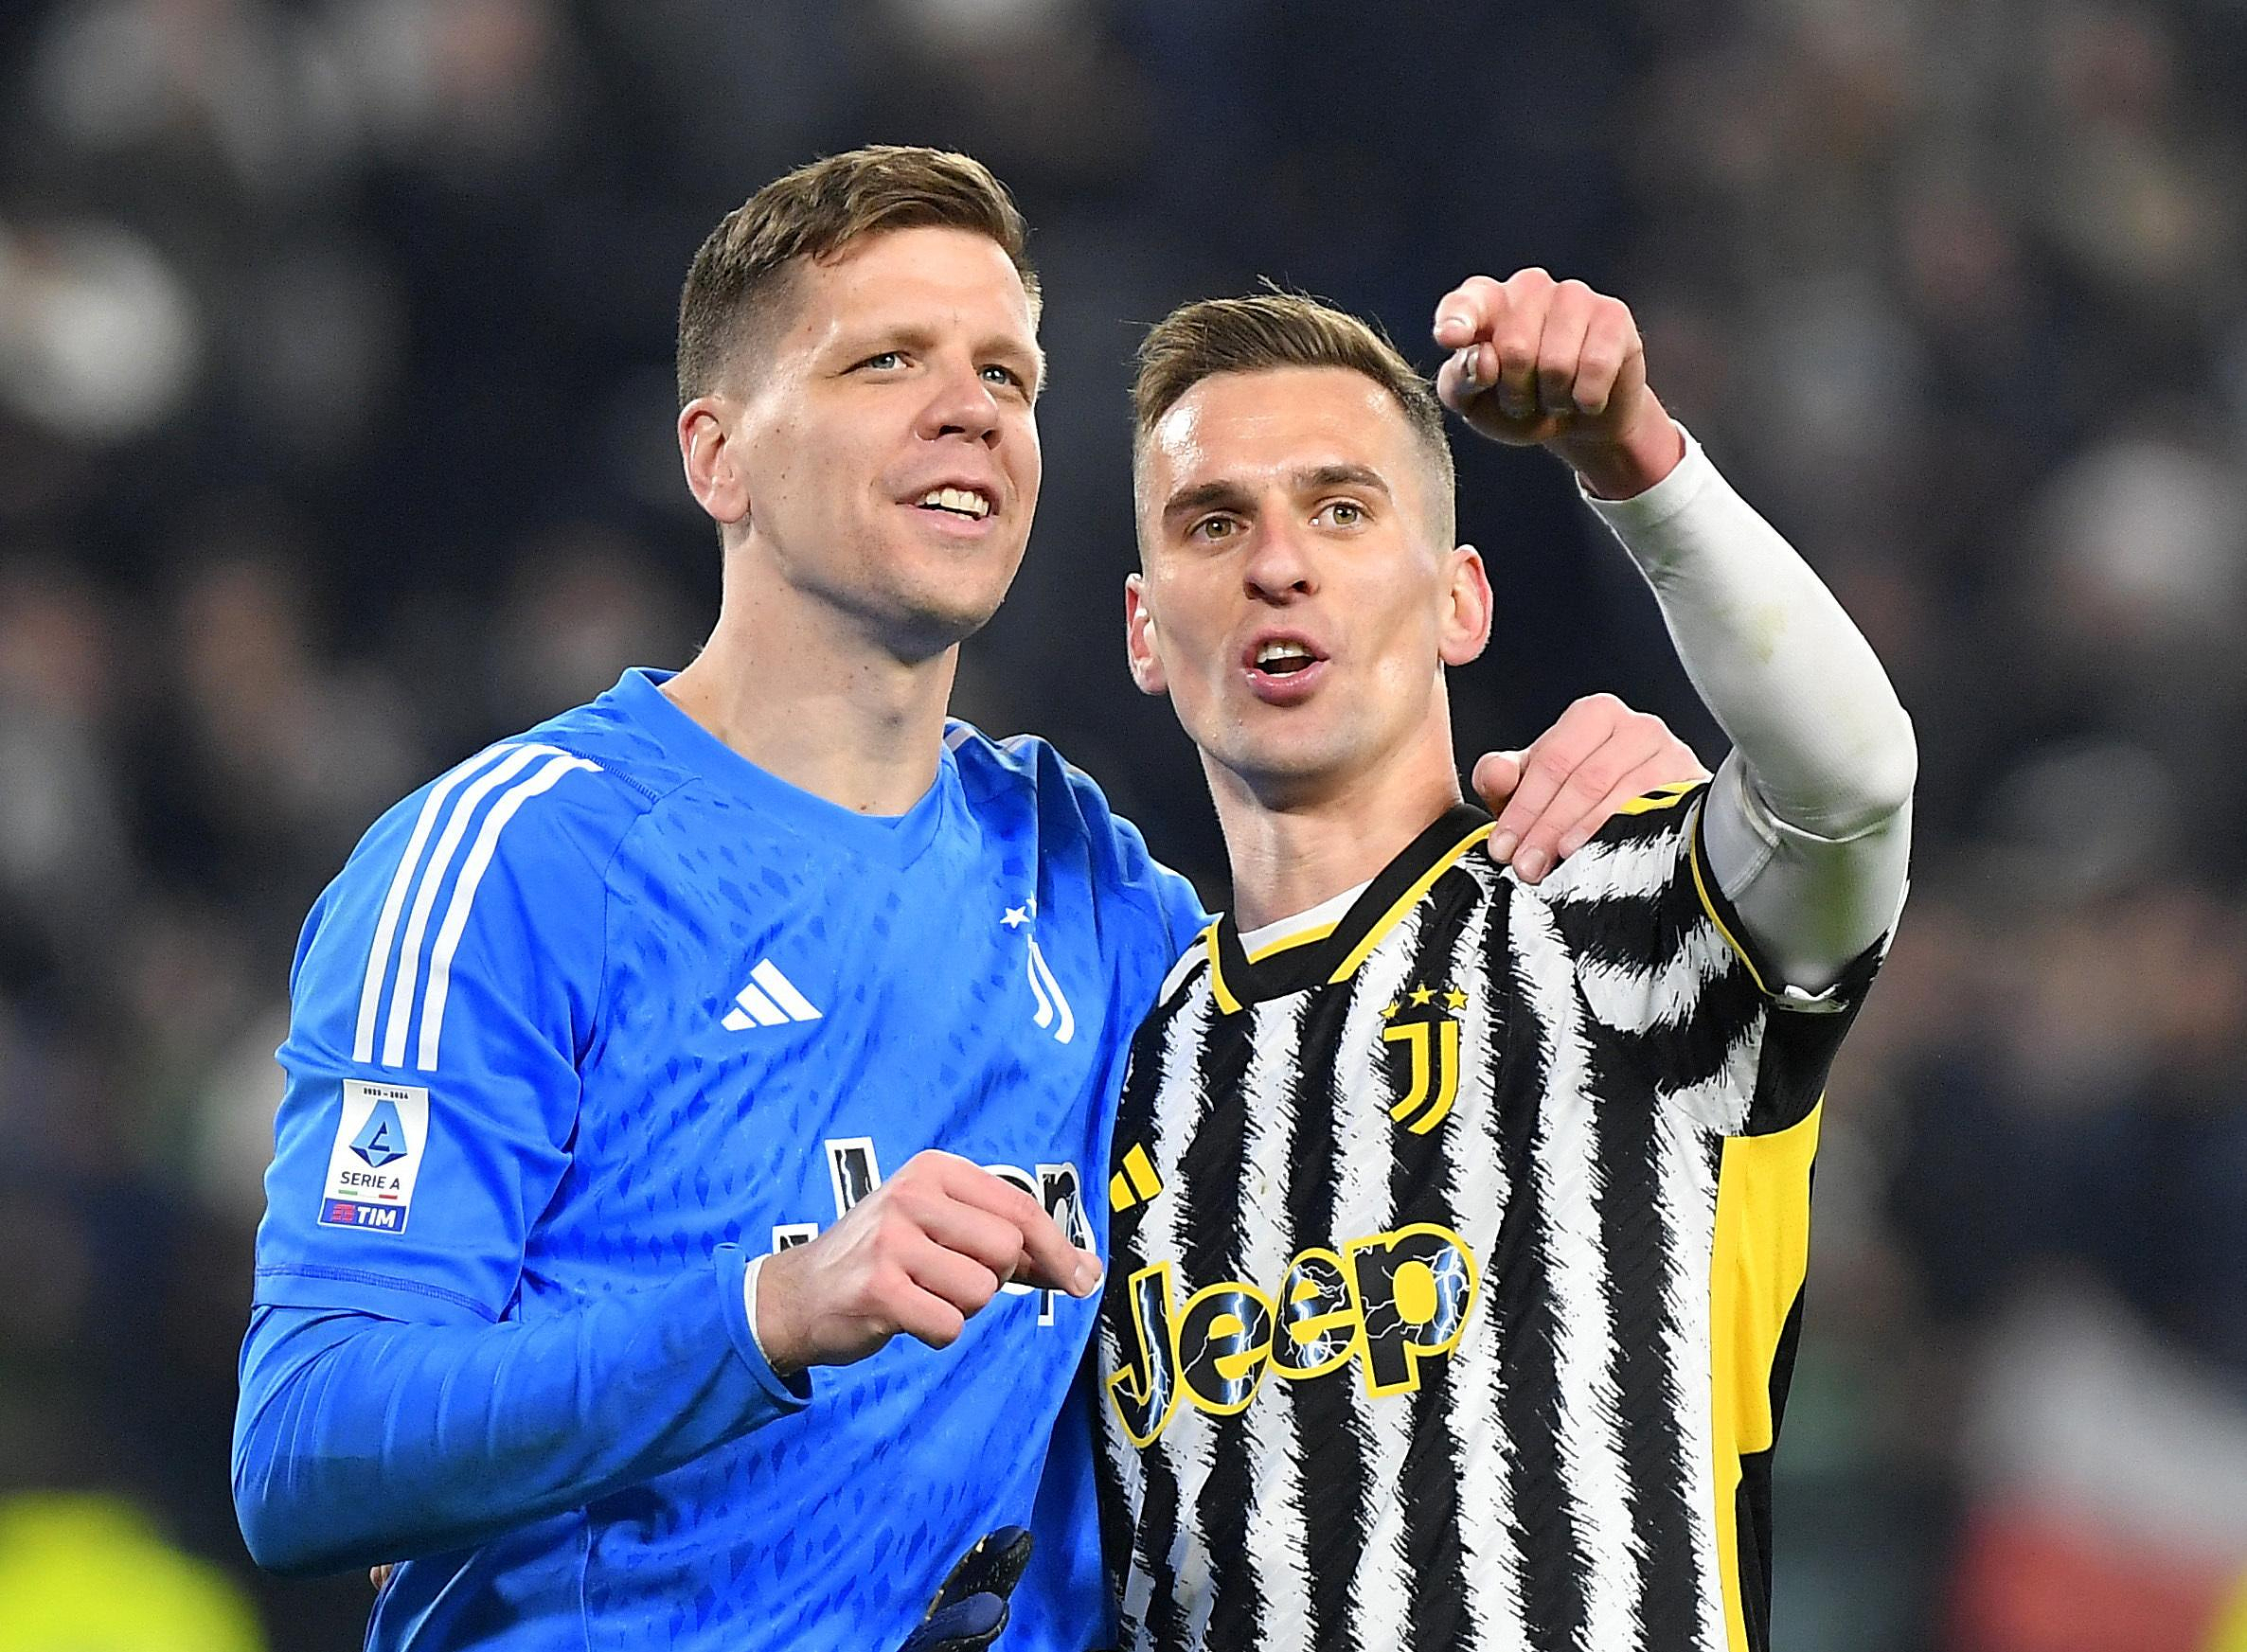 Italian Cup: Juventus gets the last ticket to the quarter-finals